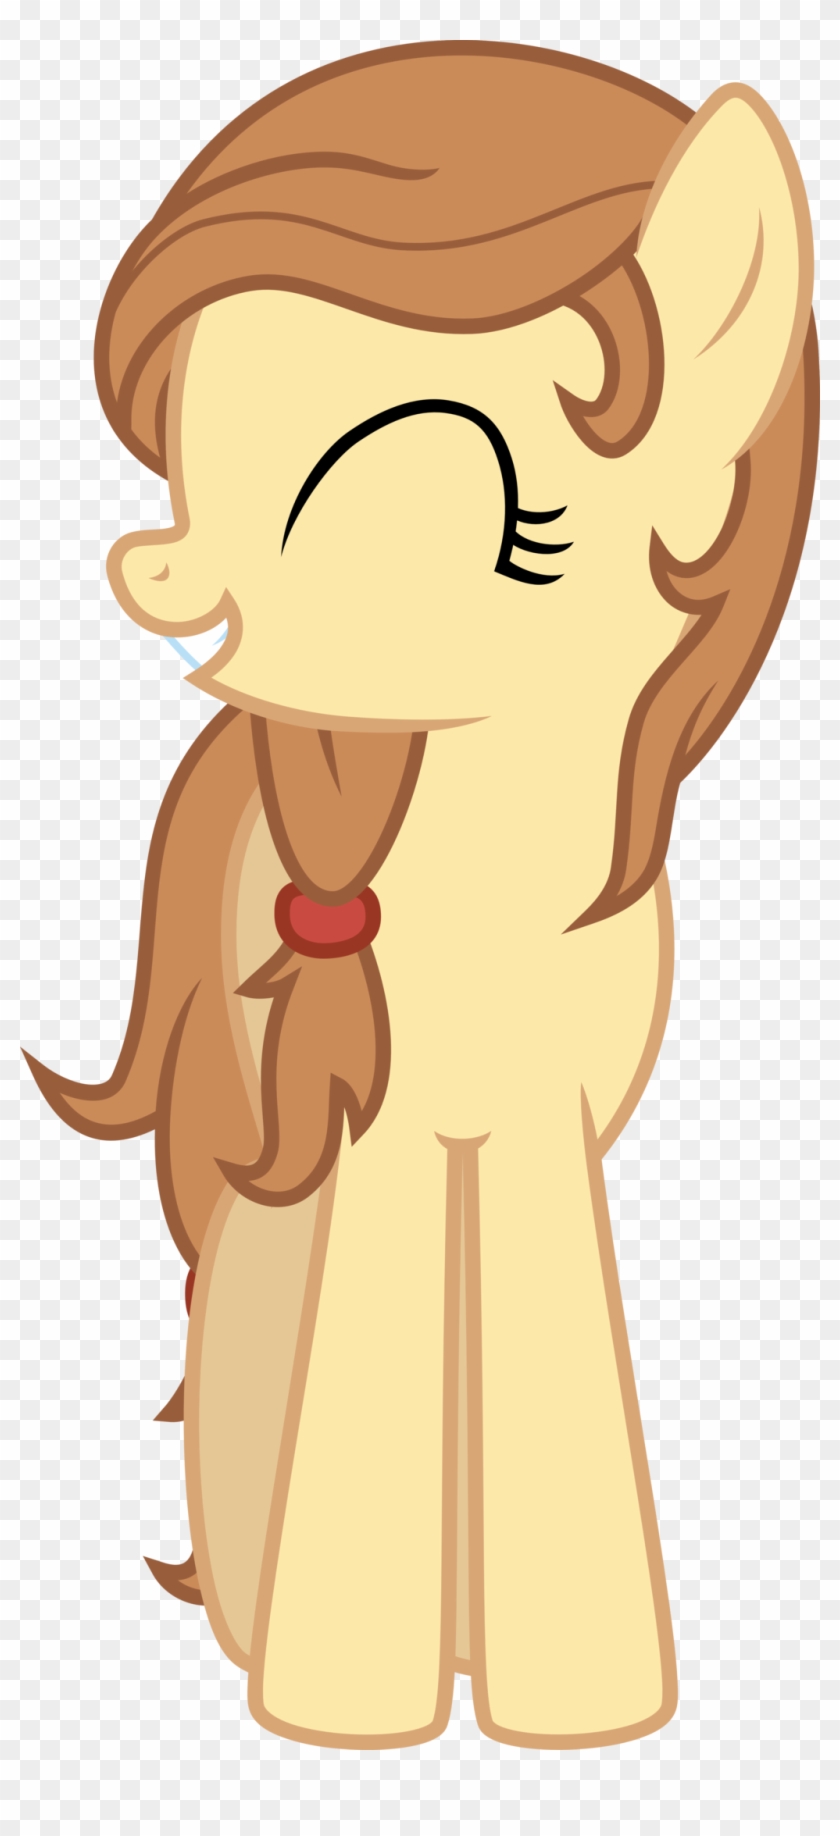 Button's Mom Cheerful Smile By Jeatz-axl - Button's Mom Vector #1316220